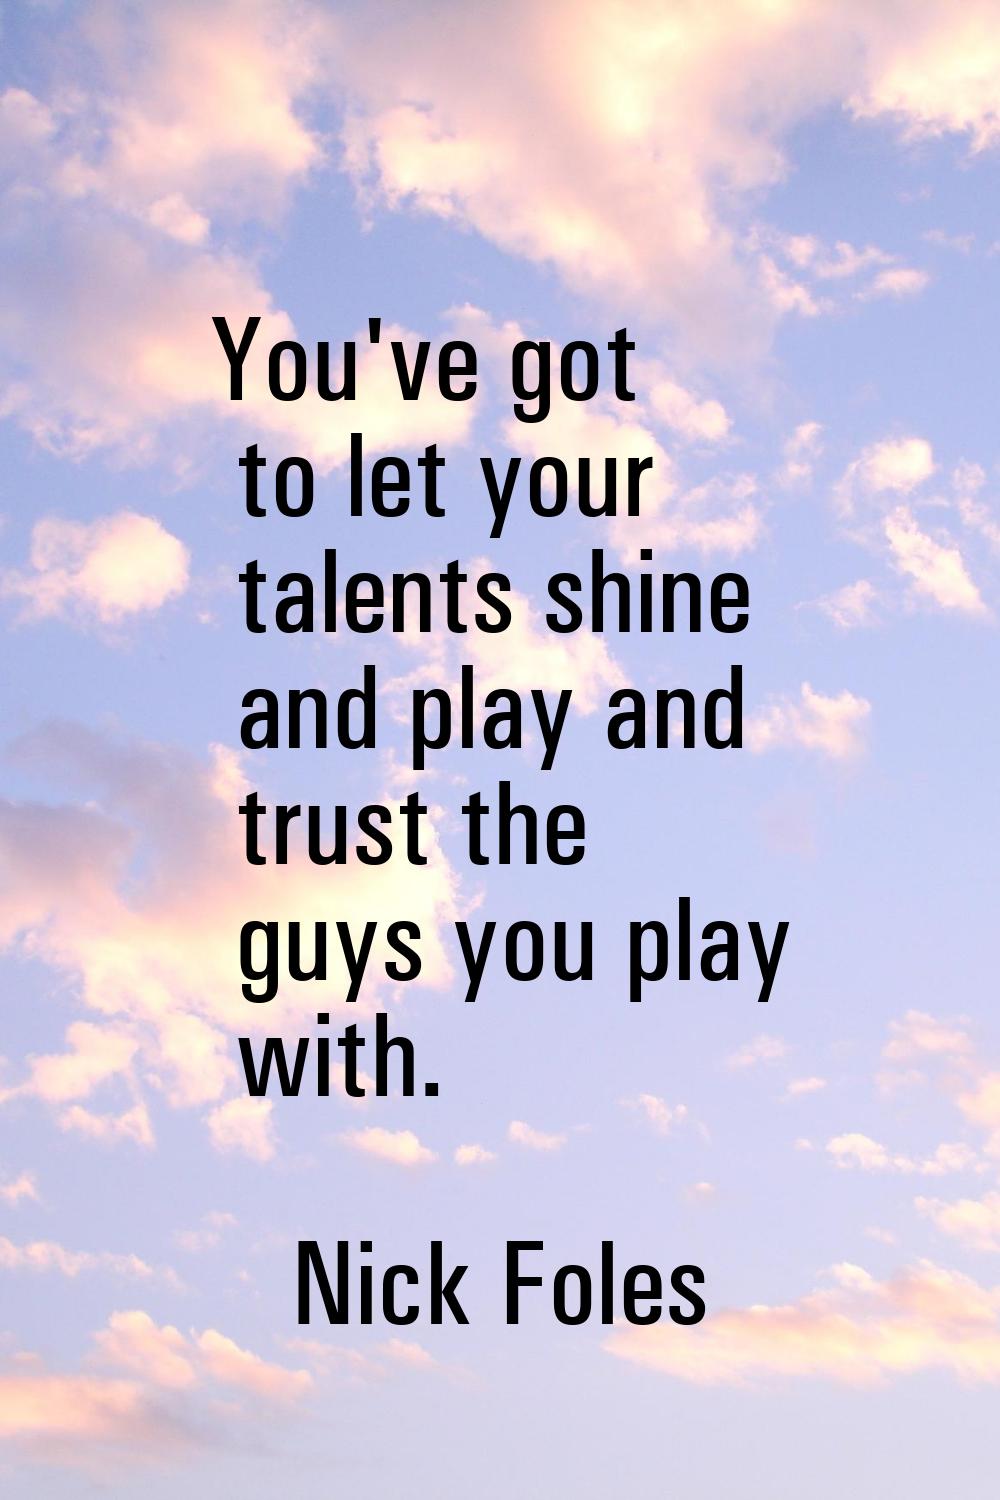 You've got to let your talents shine and play and trust the guys you play with.